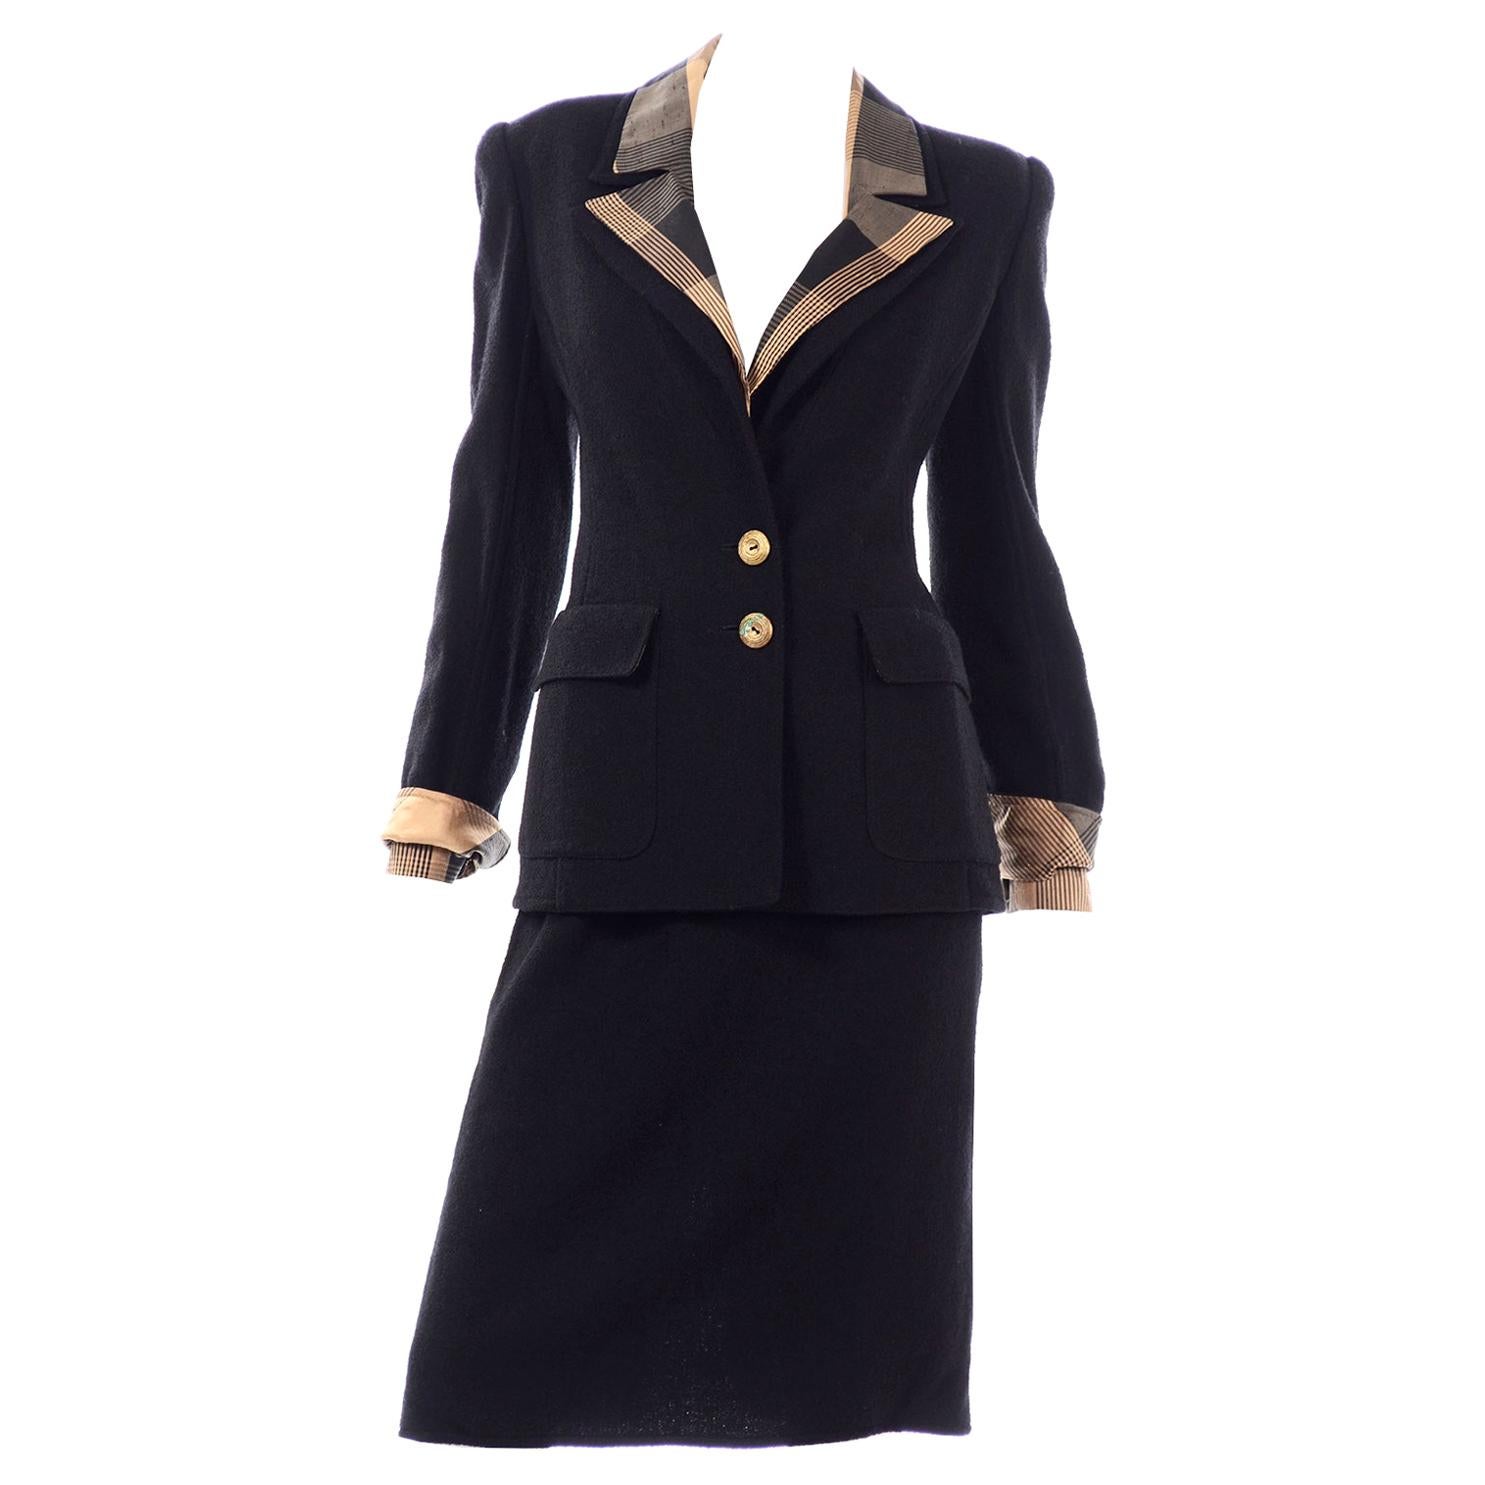 Valentino Boutique Vintage Black Boucle Skirt Suit With 2 Blazers Solid & Plaid For Sale